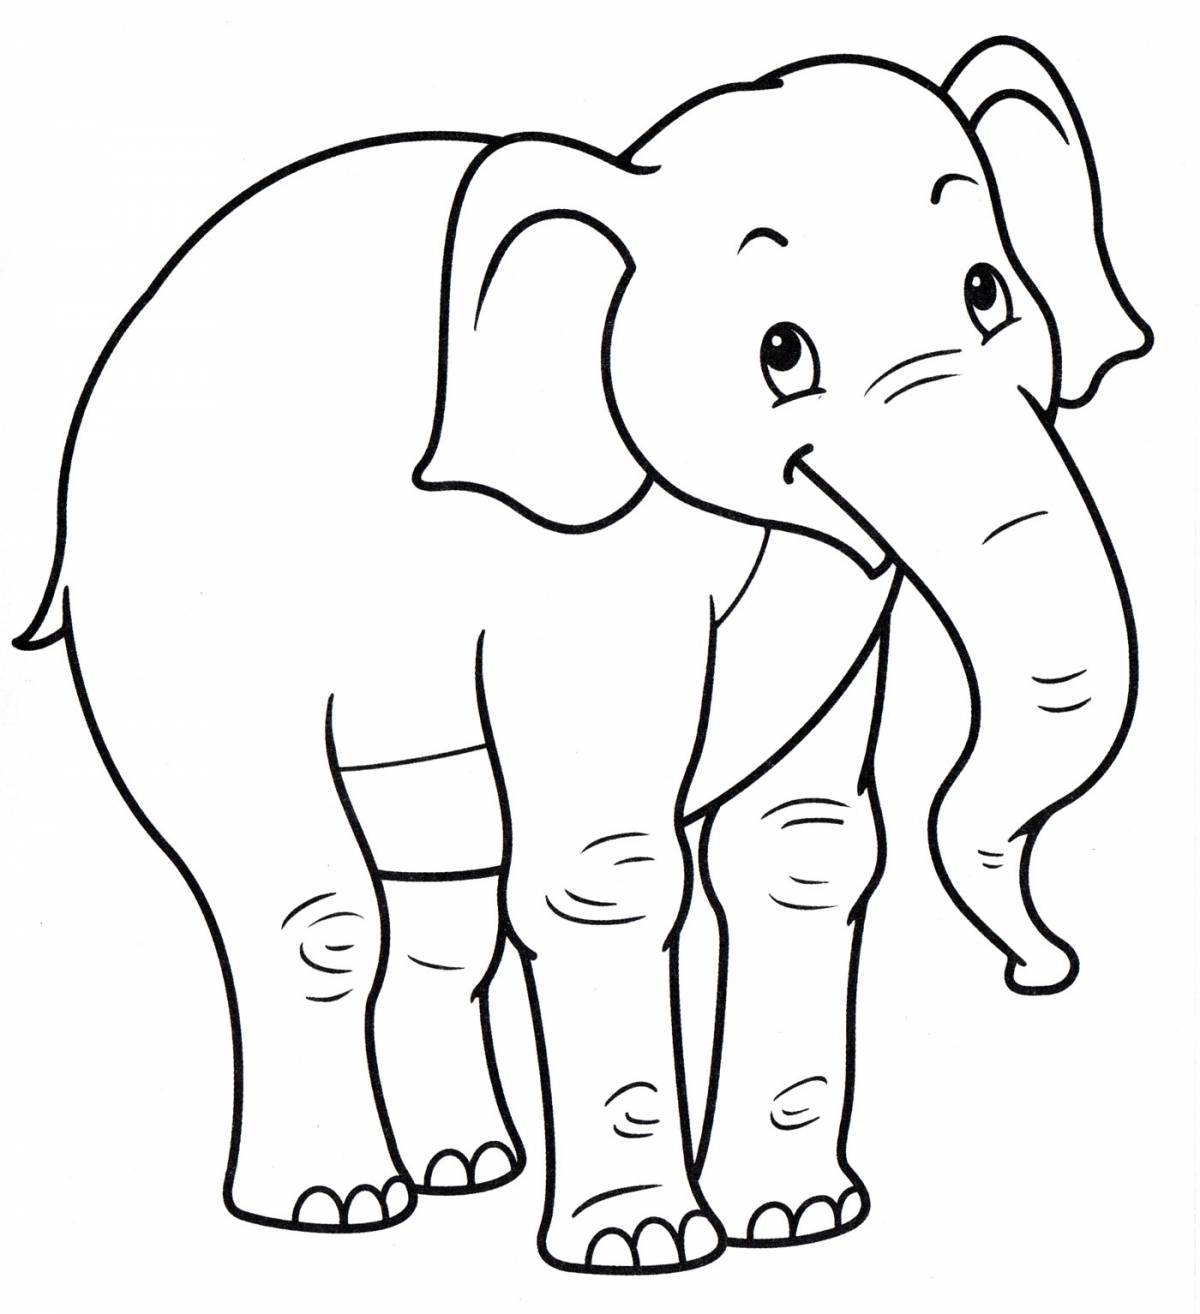 Fancy elephant coloring for kids